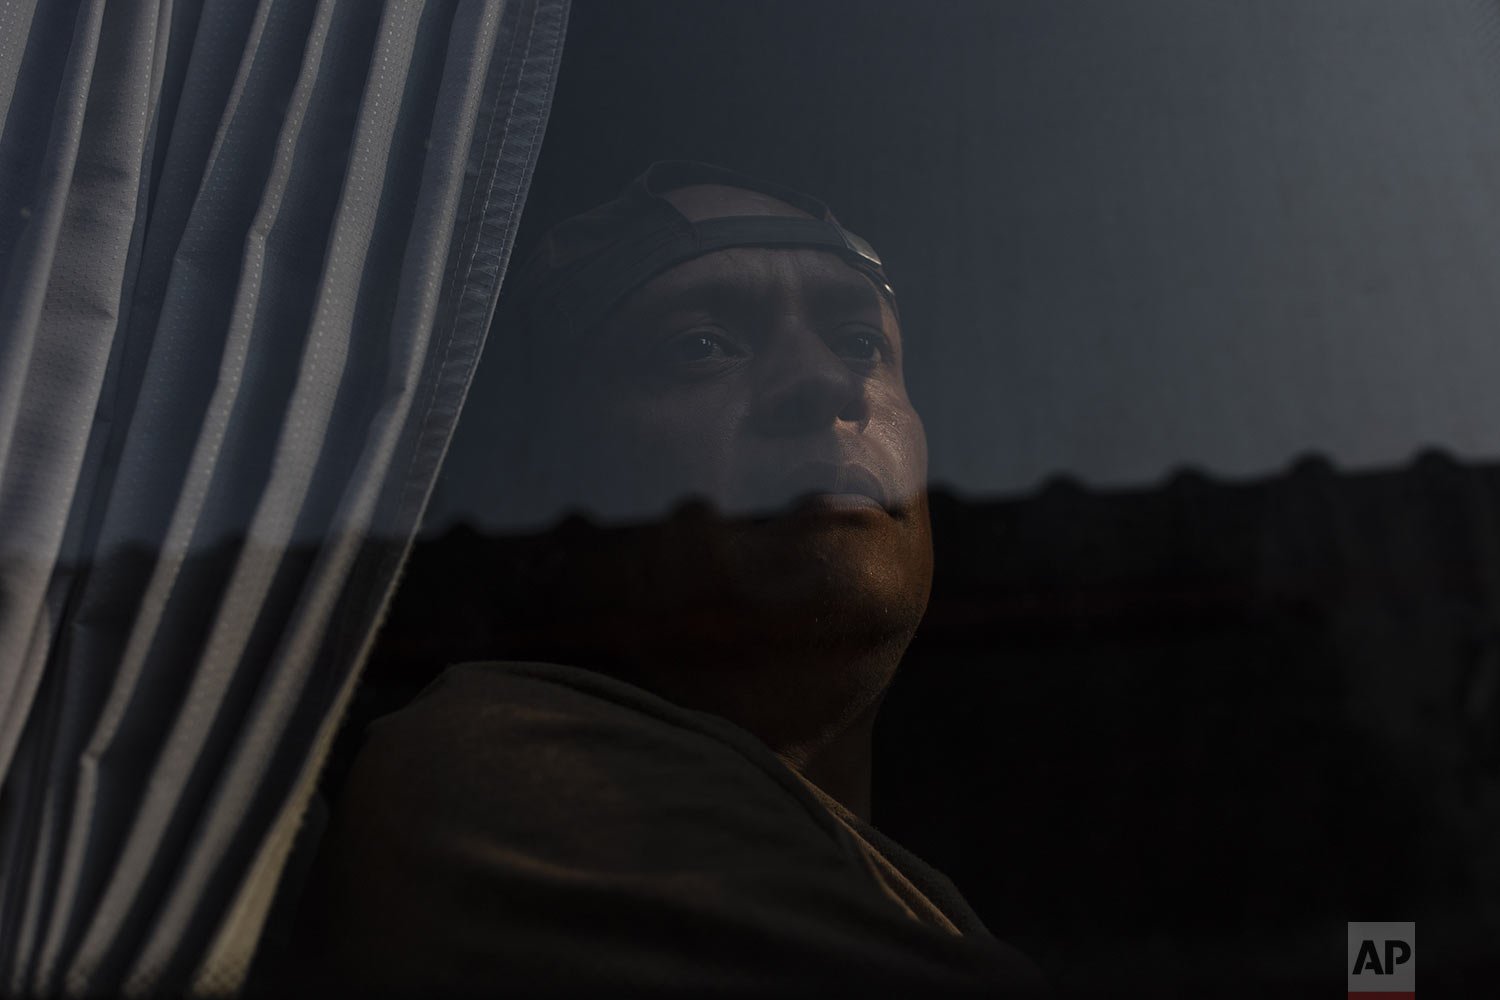  A migrant, who was part of a caravan of mostly Central Americans, looks out from a bus window after abandoning his journey to the U.S. border, in Jesus Carranza, in the Mexican state of Veracruz, Nov. 17, 2021.   (AP Photo/Felix Marquez) 